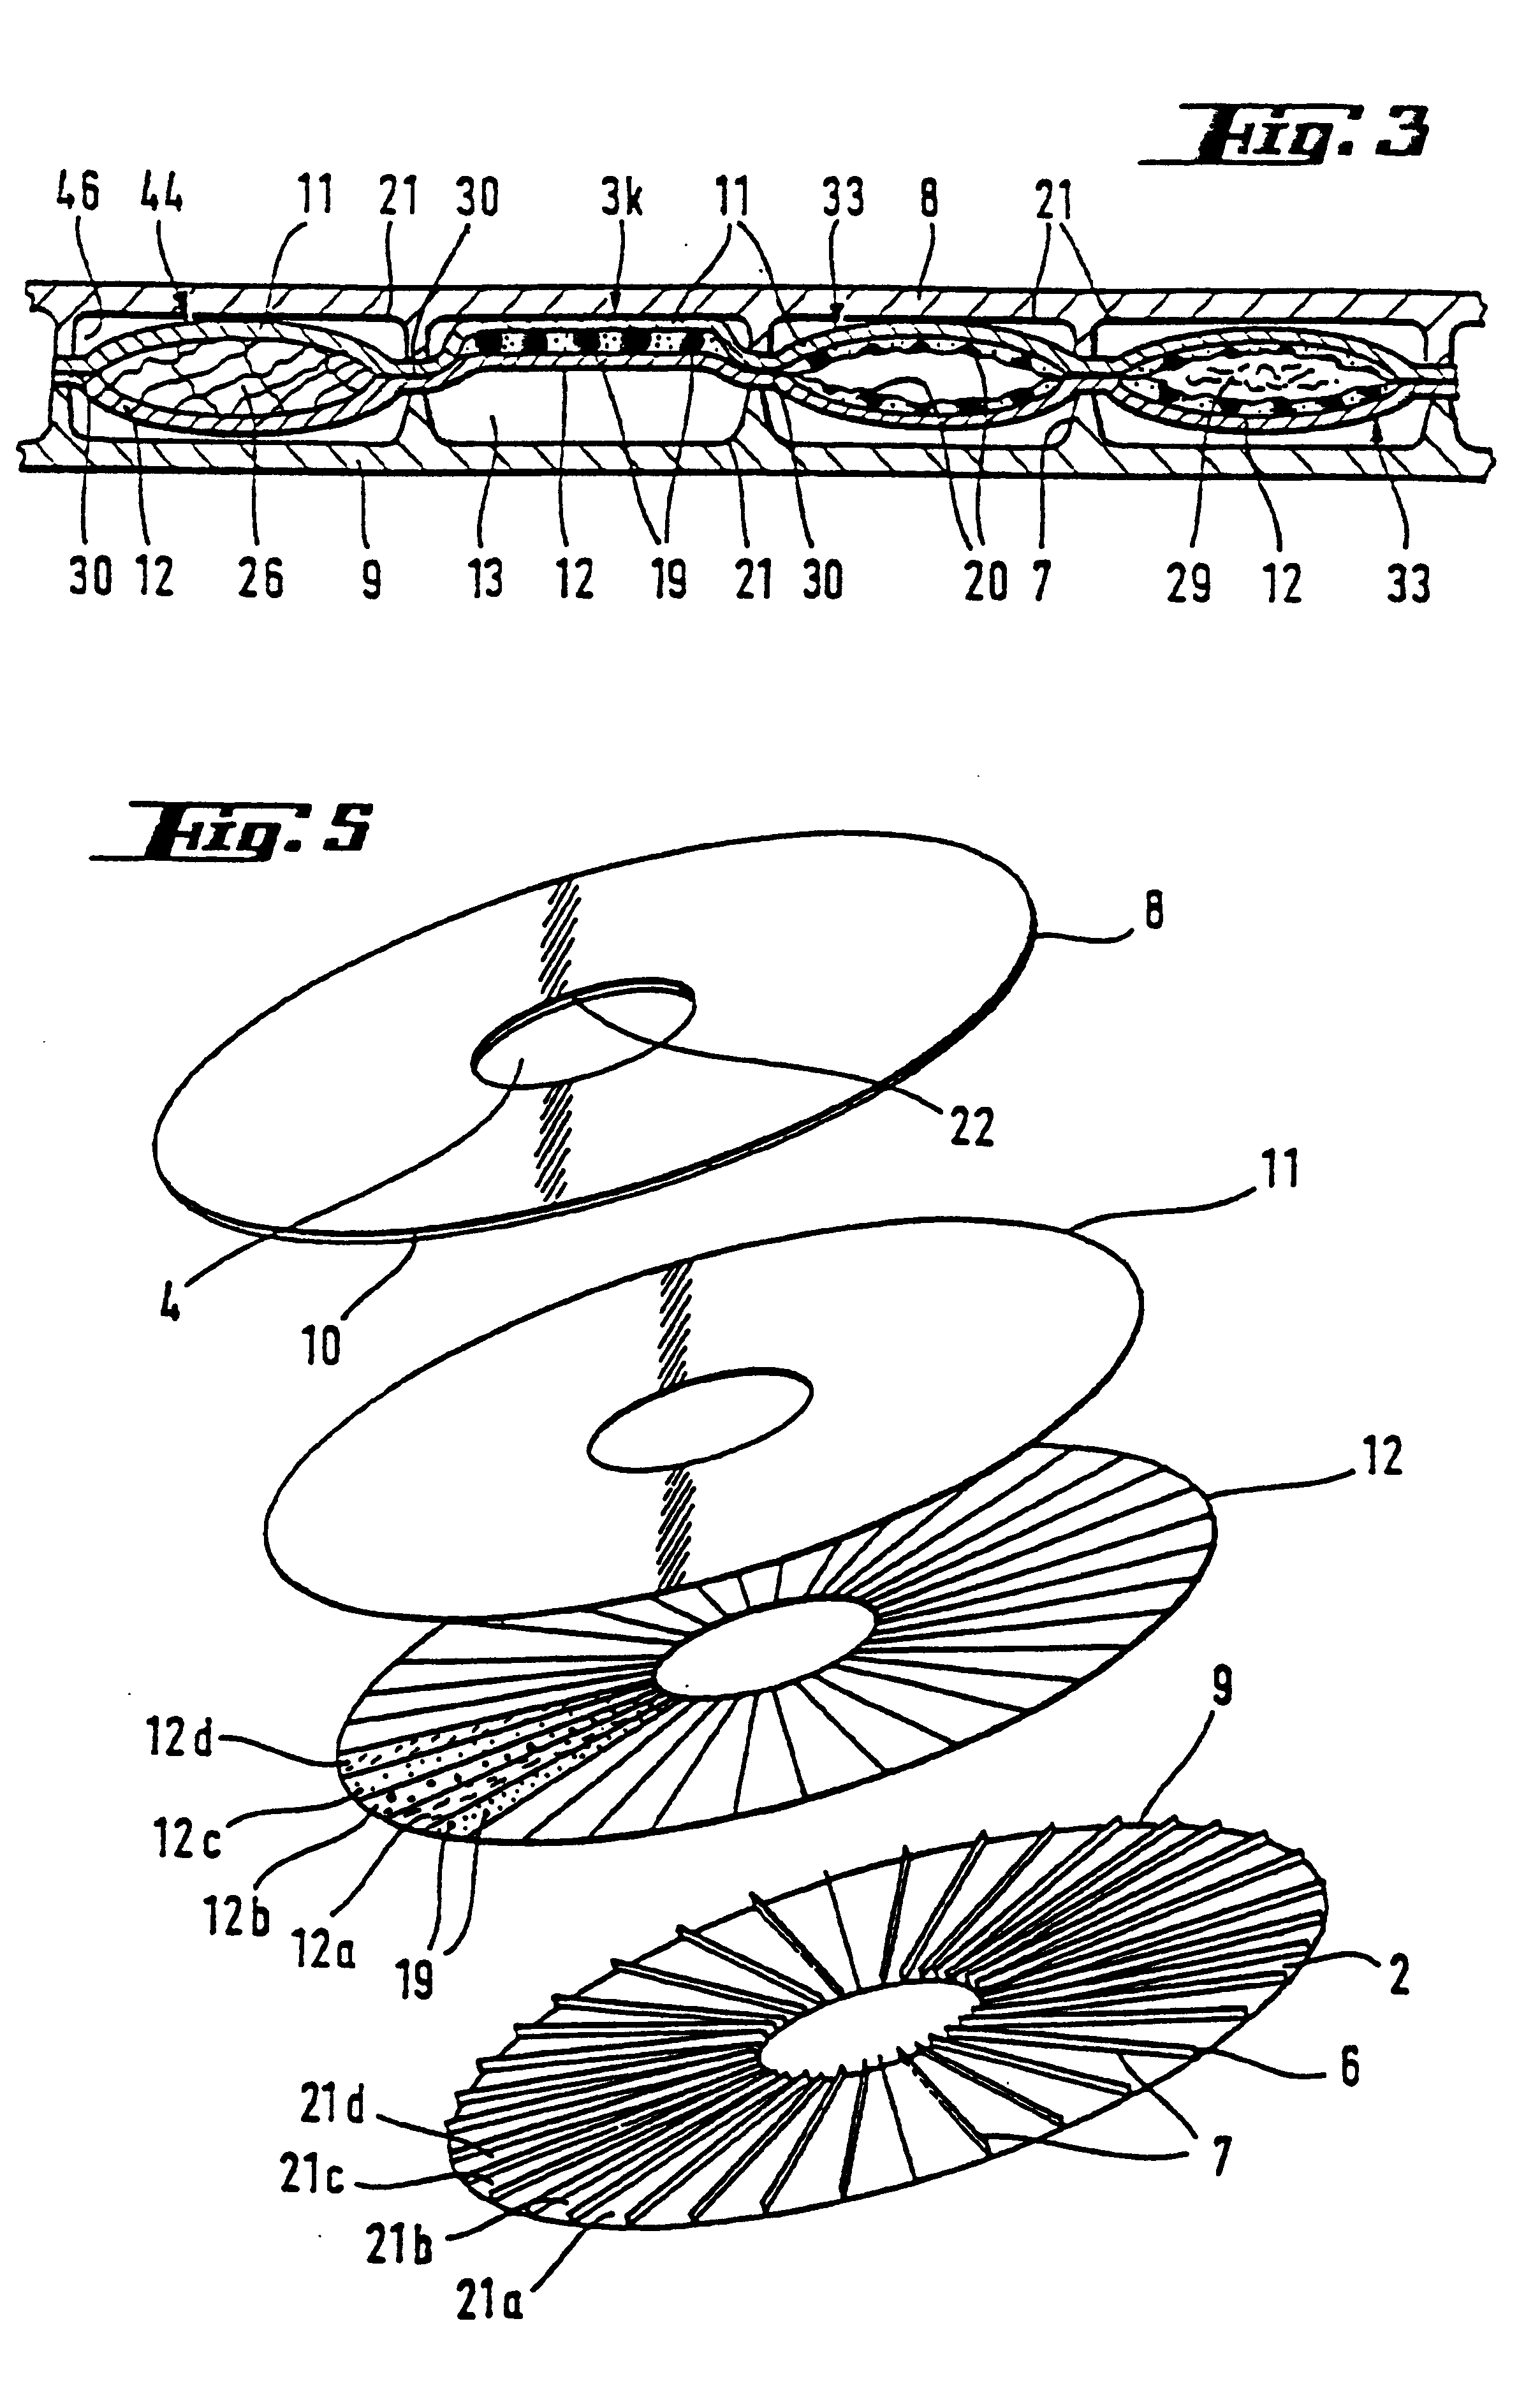 Method of supplying substances to be dispensed into air